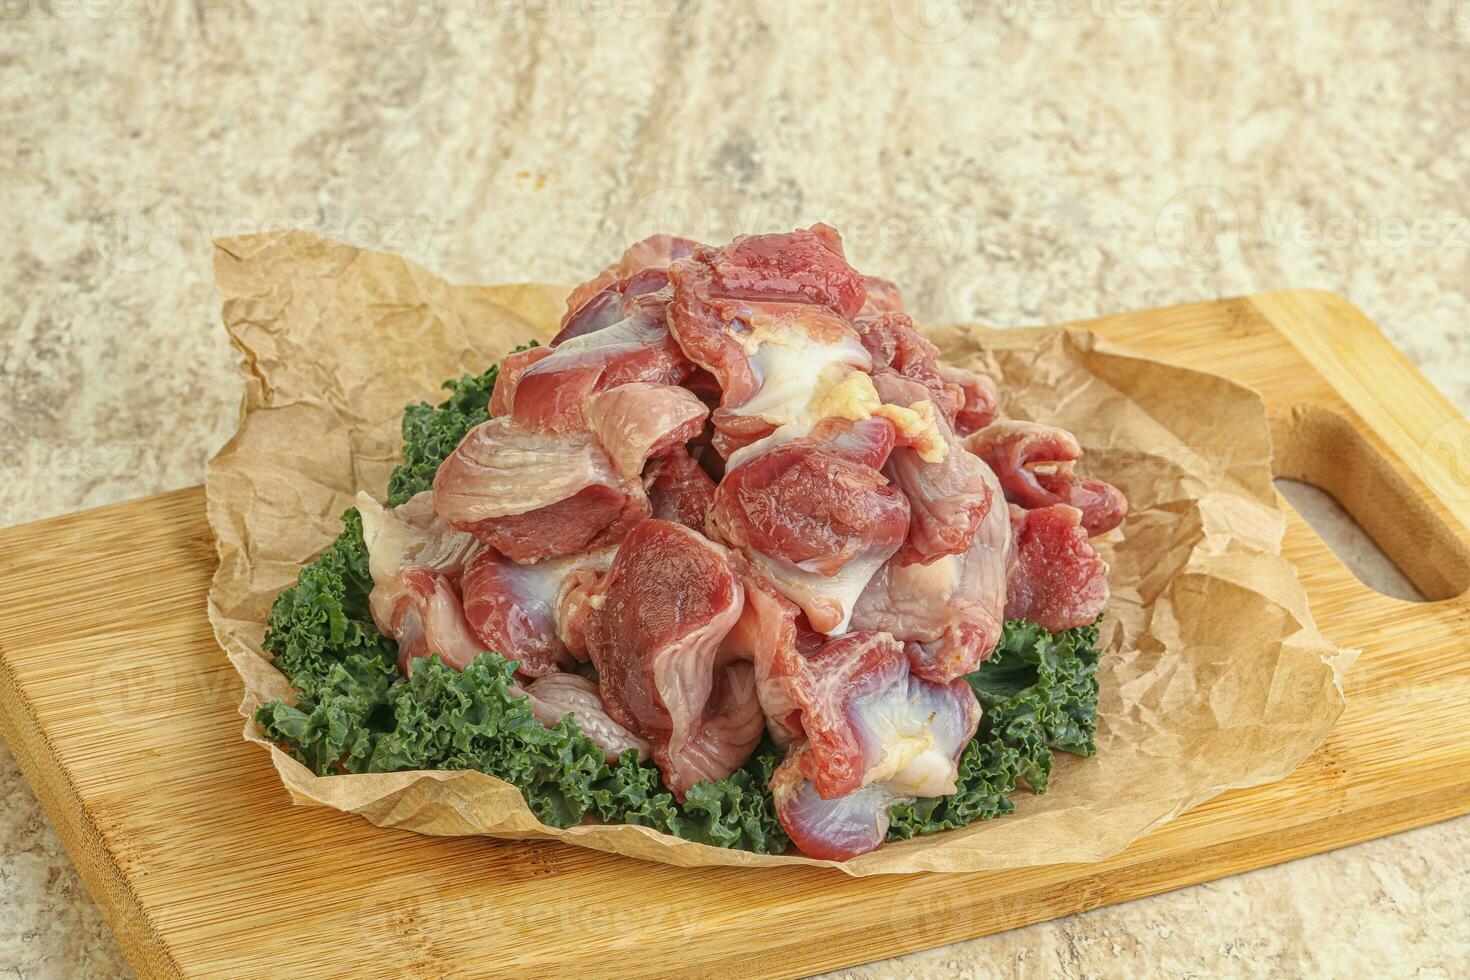 Raw chicken stomach for cooking photo